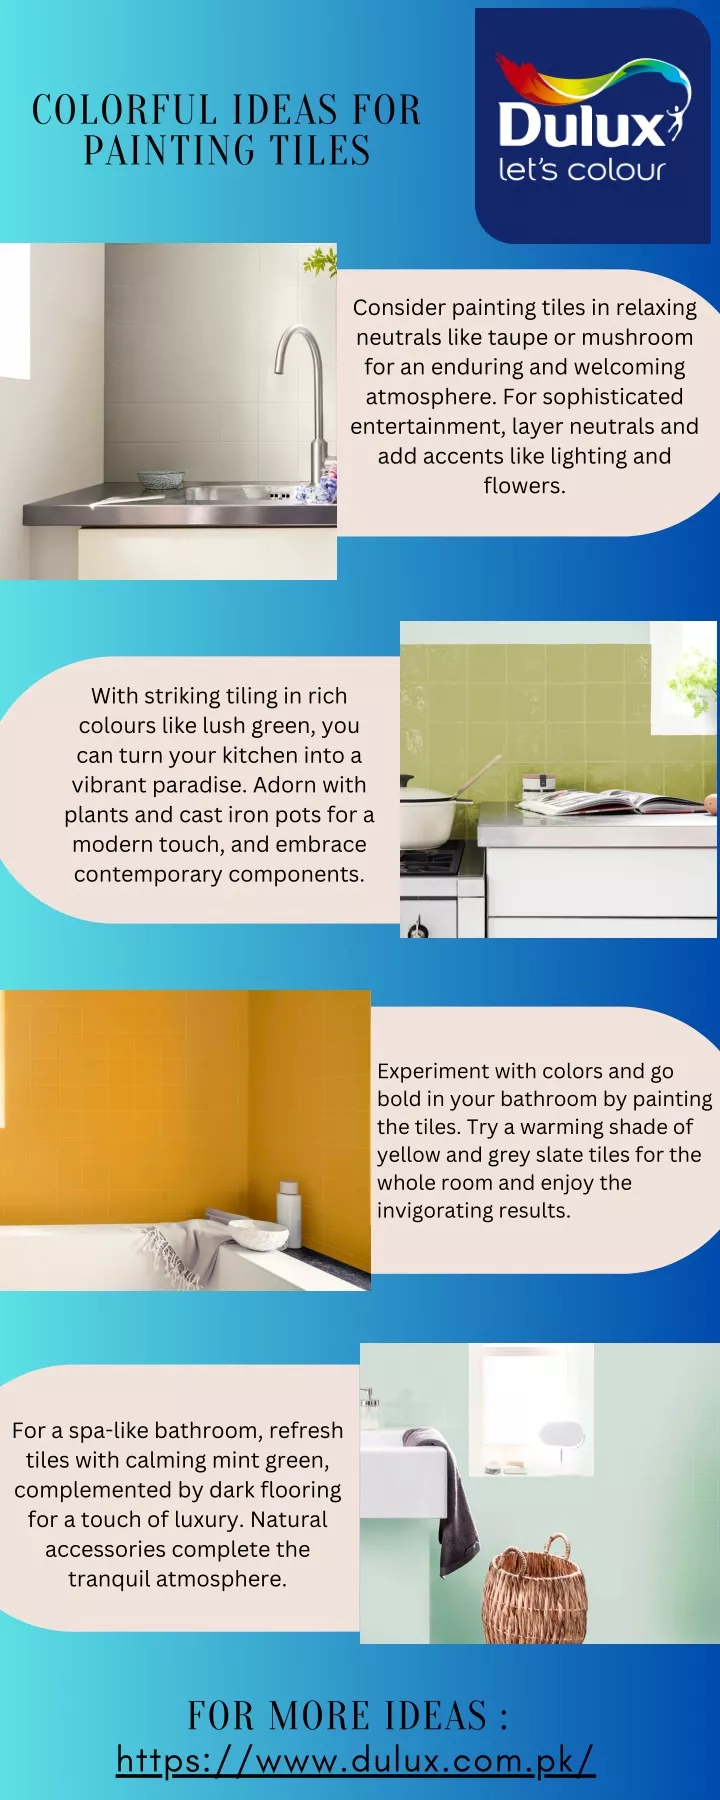 colorful ideas for painting tiles